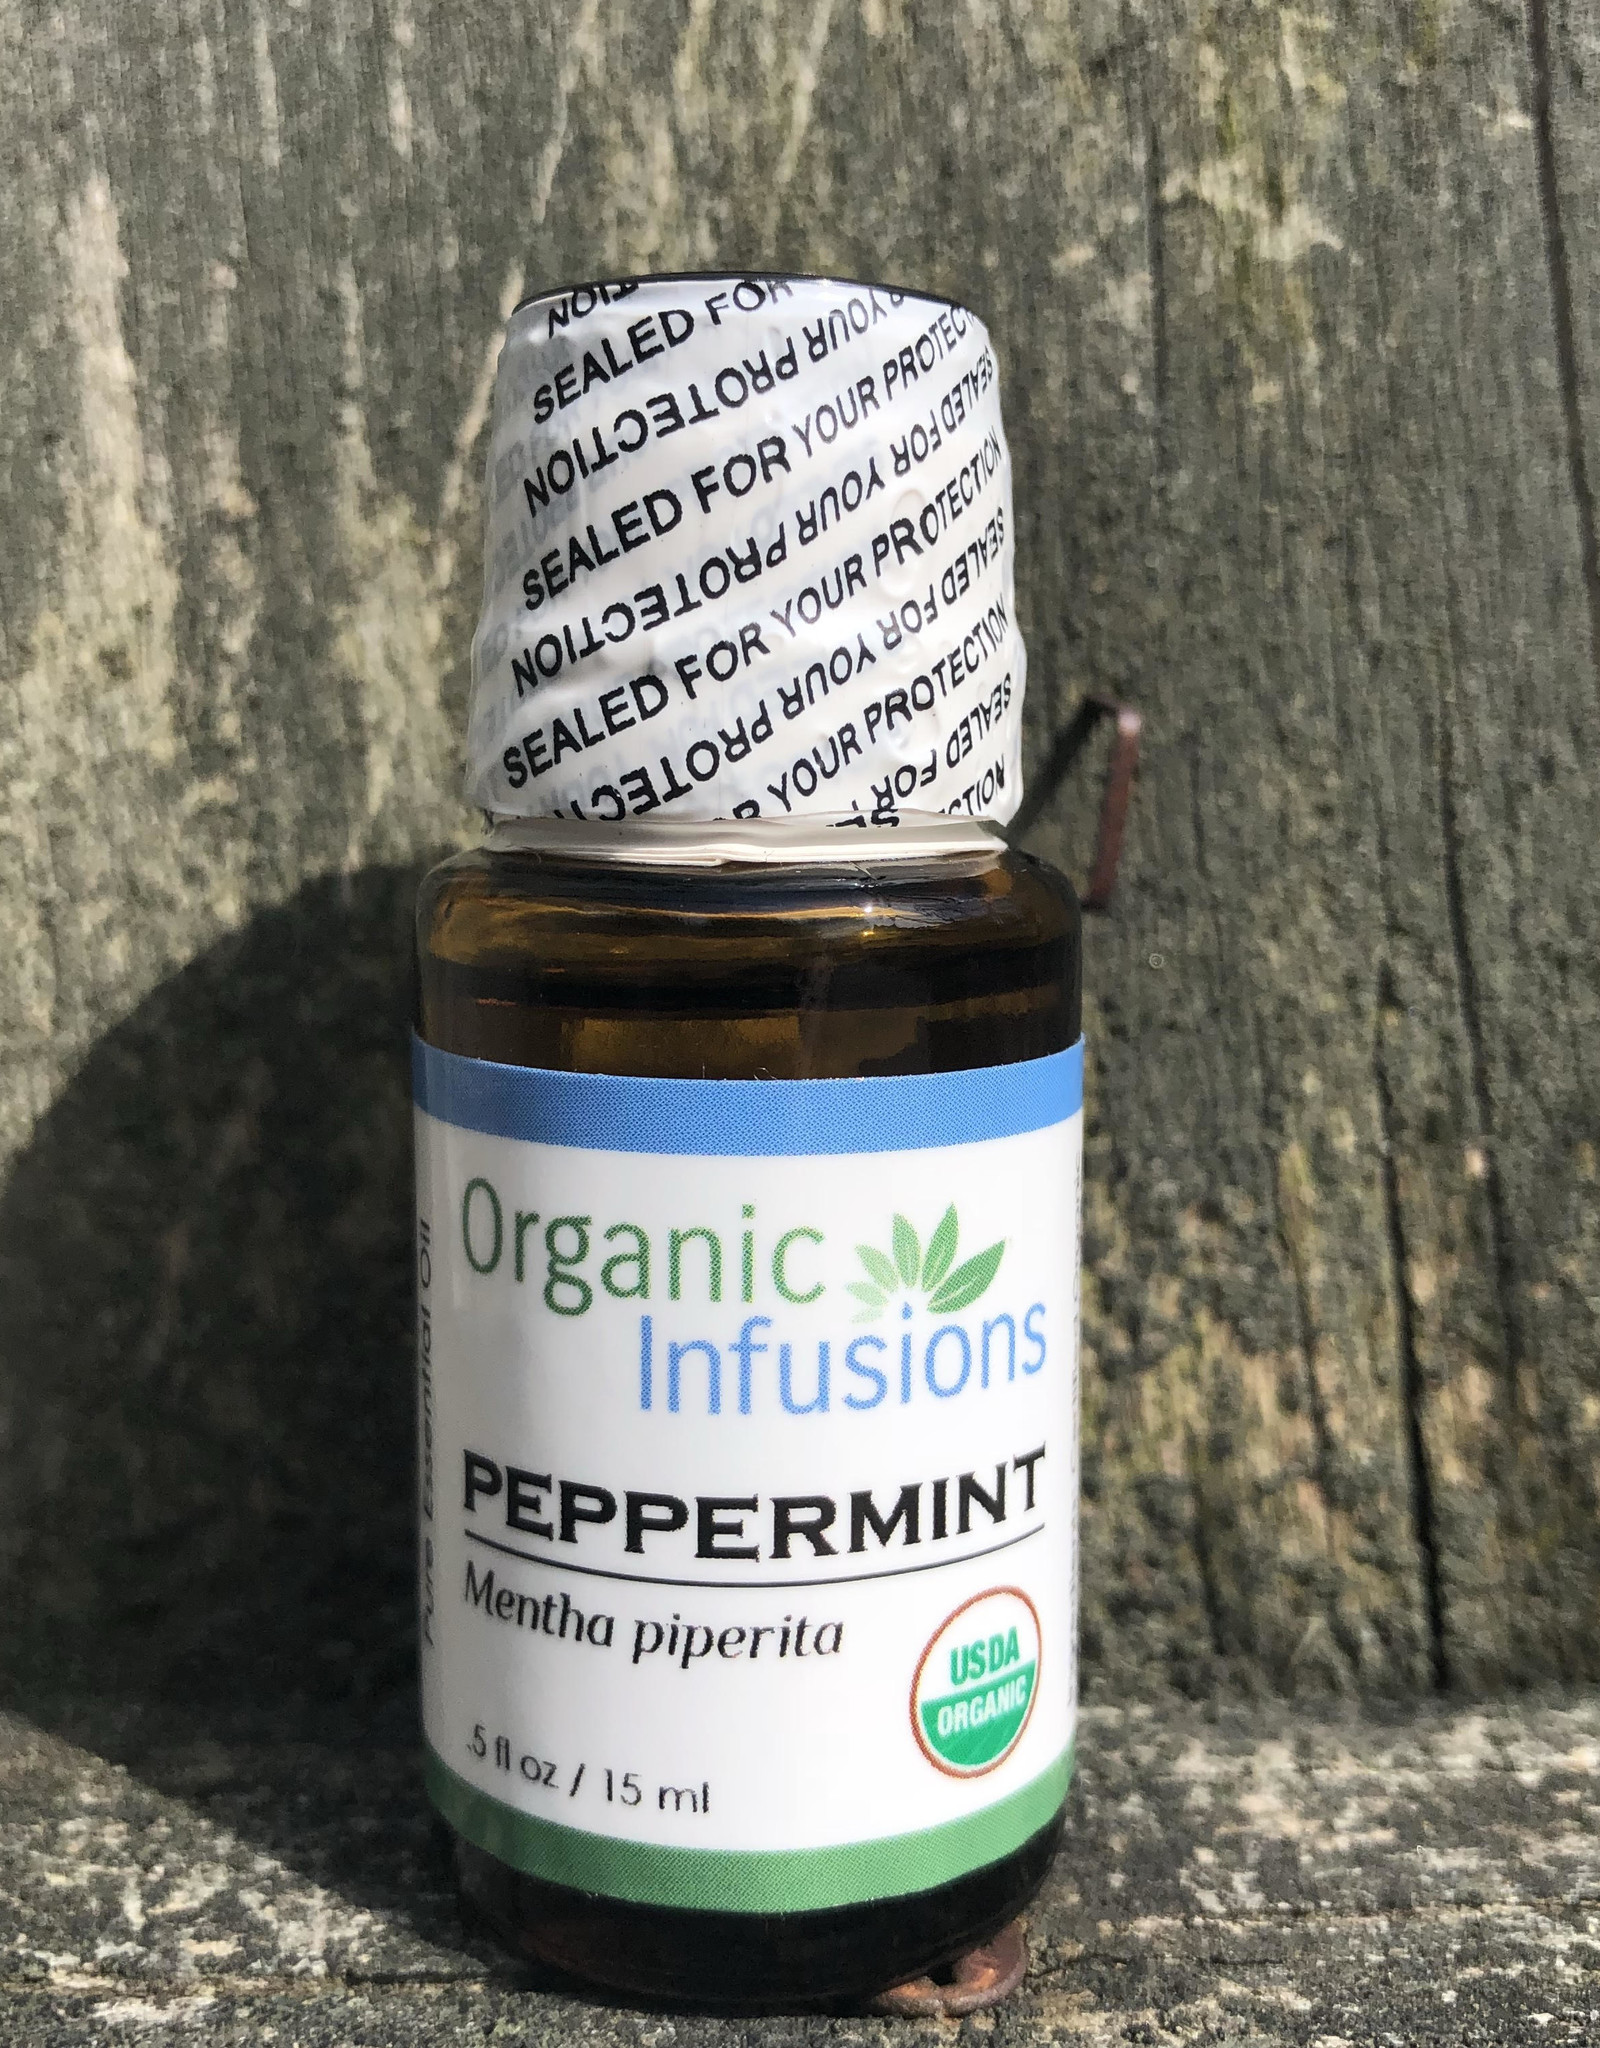 Organic Infusions Peppermint - India